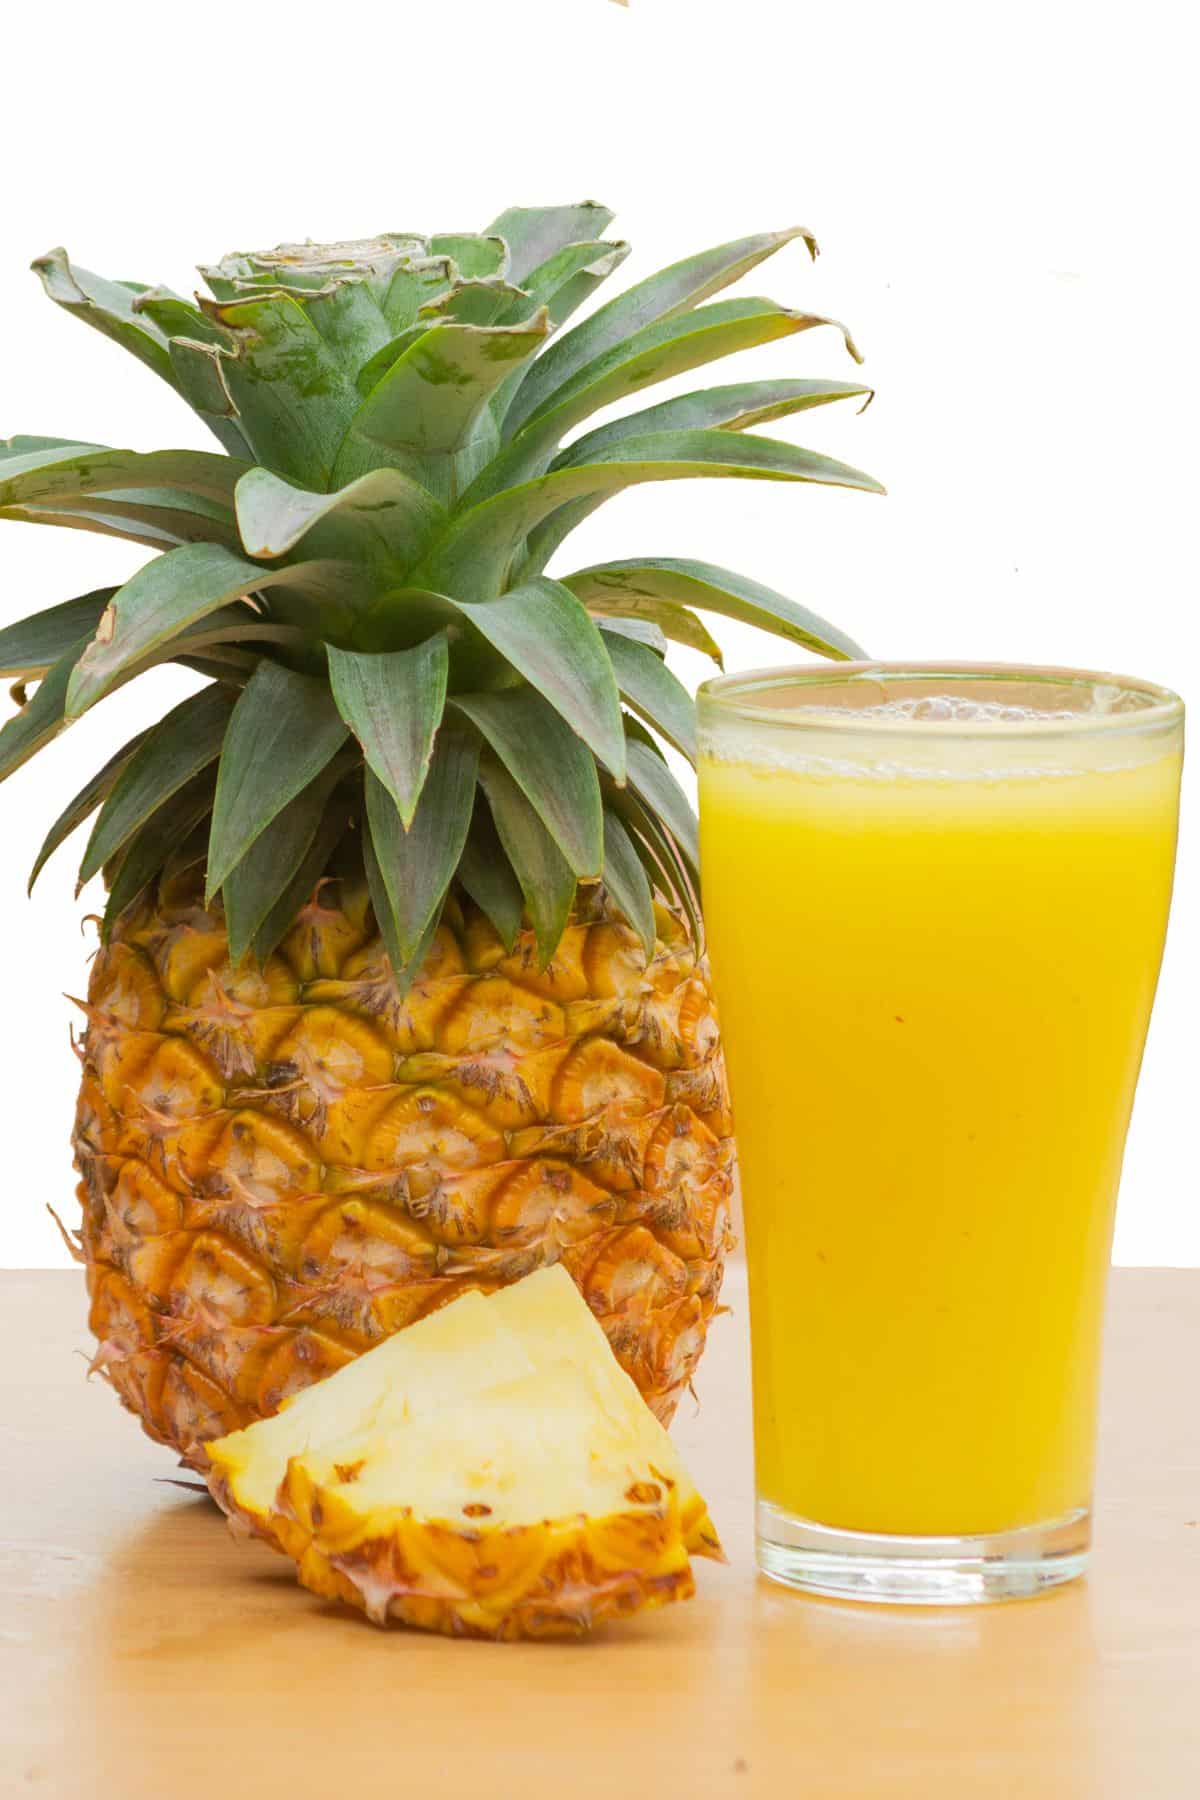 A glass of pineapple juice next to a whole fresh pineapple.